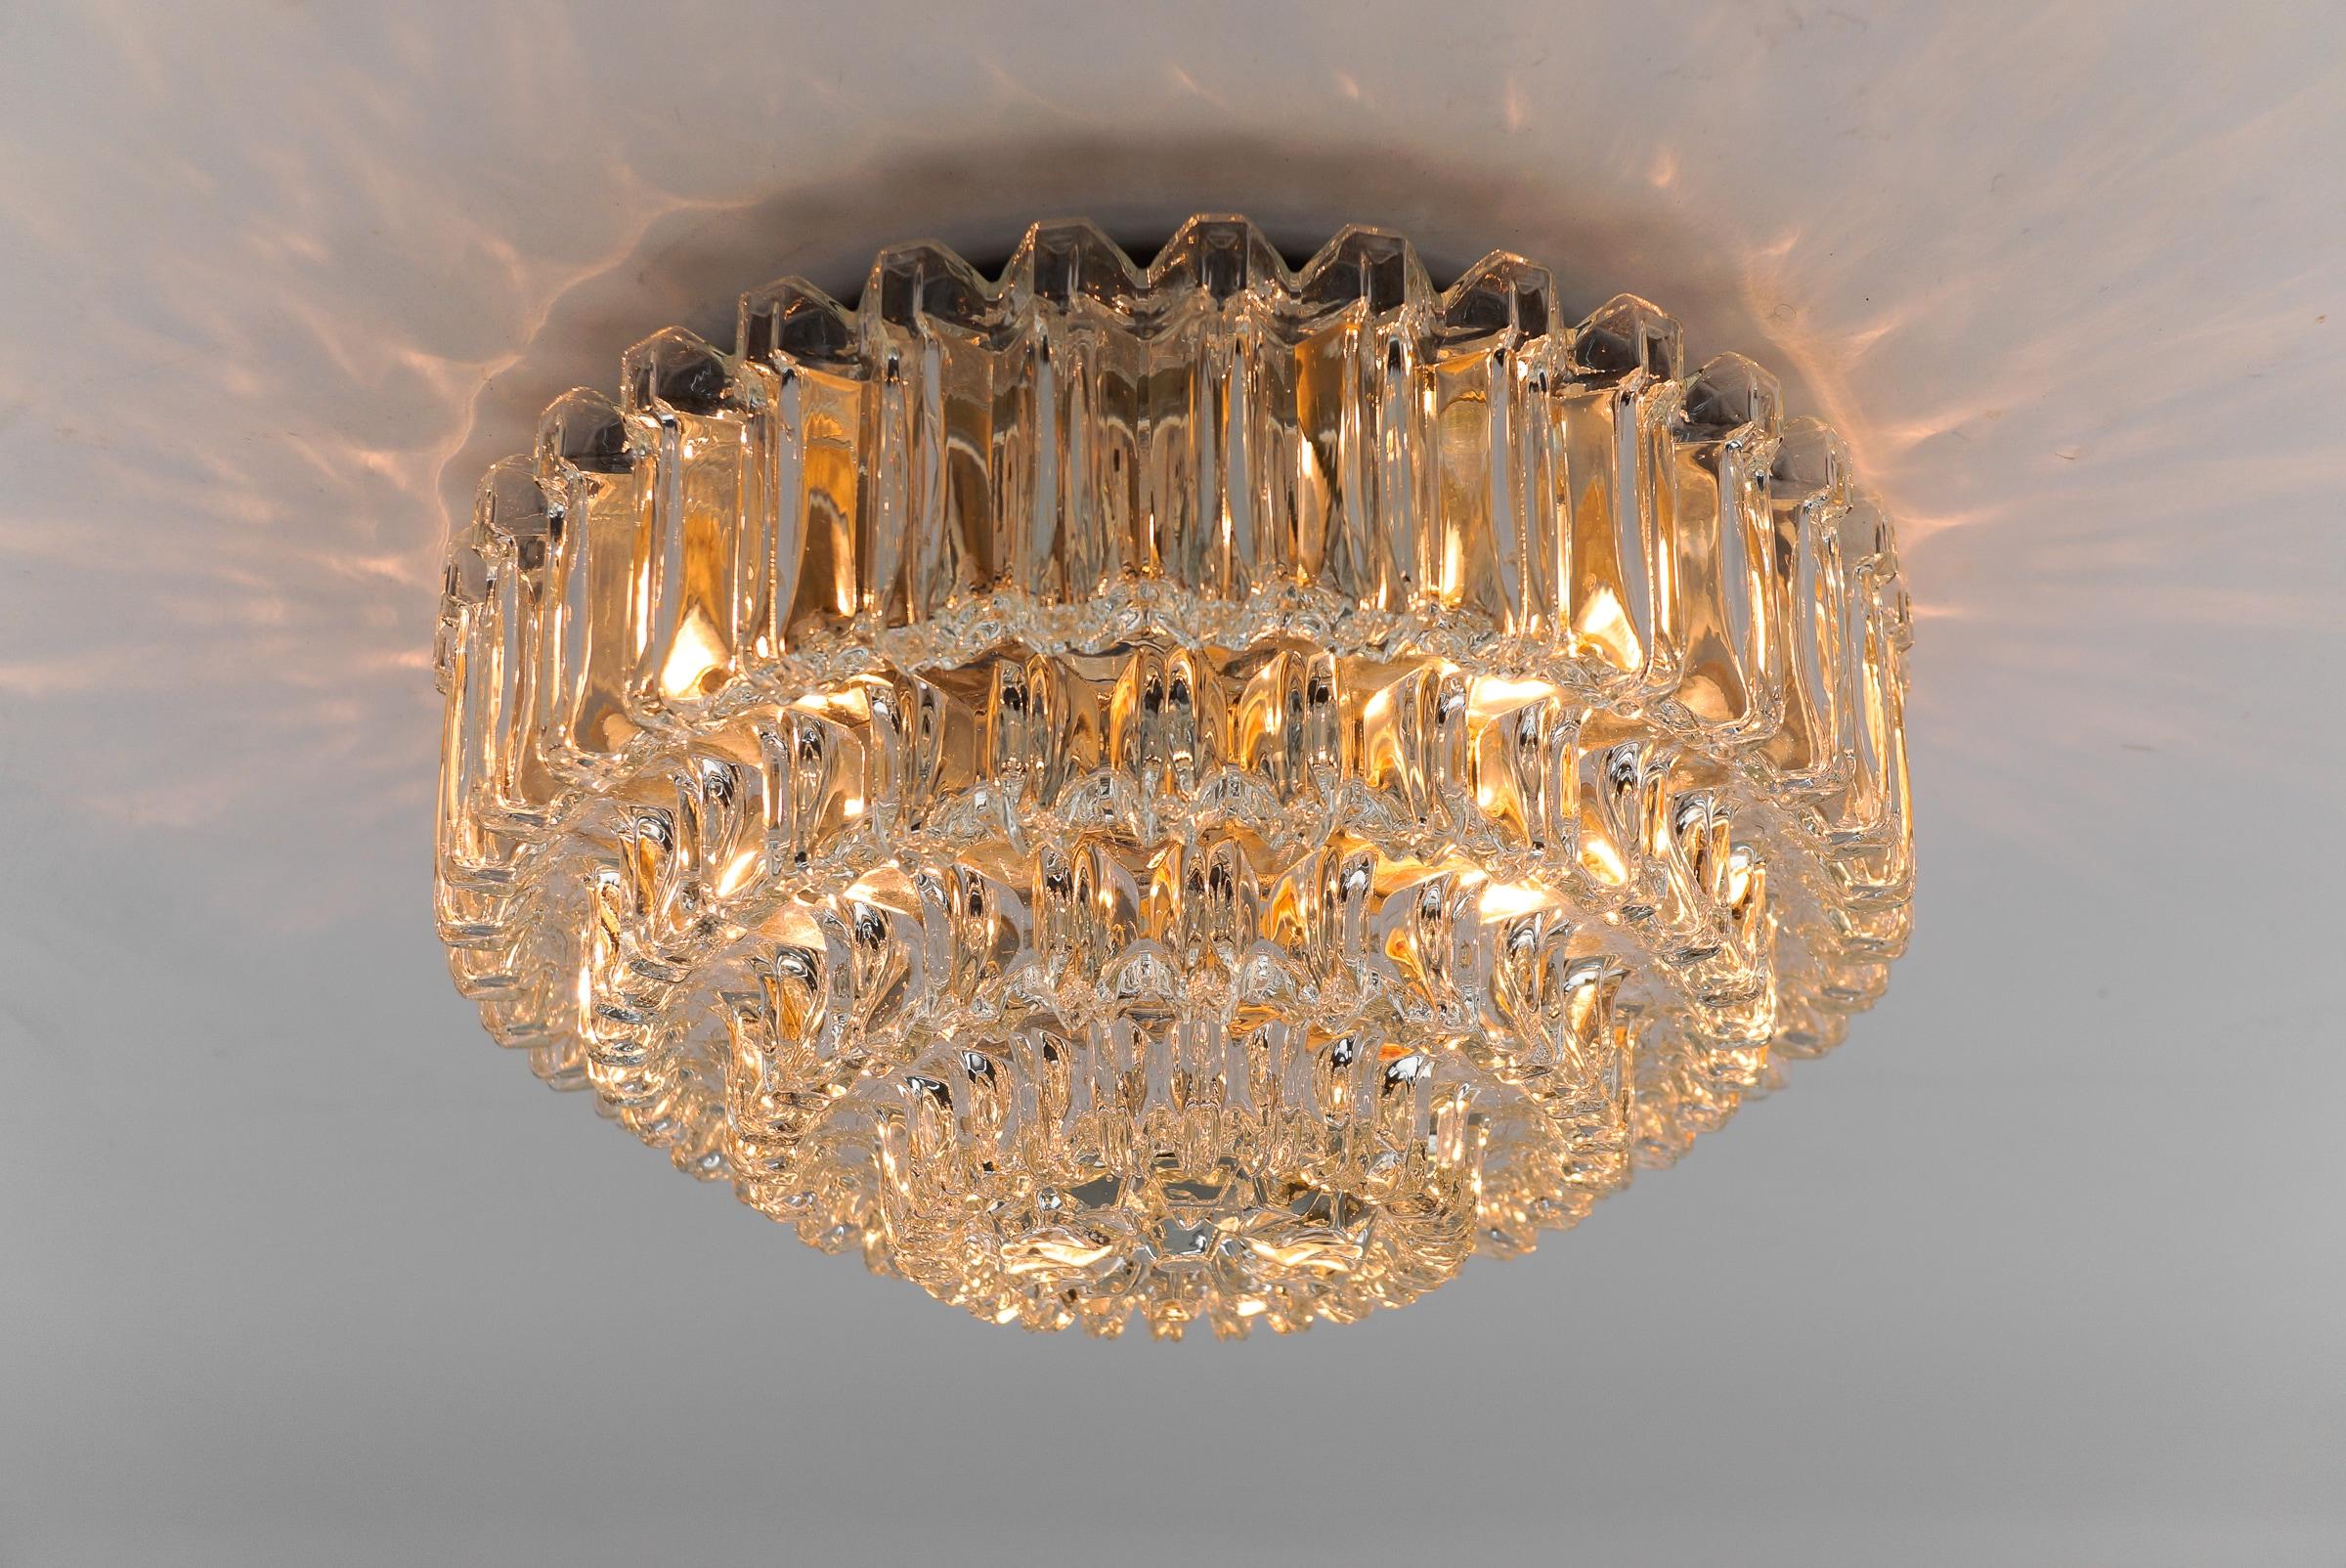 Elegant Four-Tier Crystal Glass Flush Mount Light by Limburg, 1960s Germany

The fixture need 2 x E27 standard bulb.

Light bulbs are not included.

It is possible to install this fixture in all countries (US, Australia, Asia, UK, Europe,..)